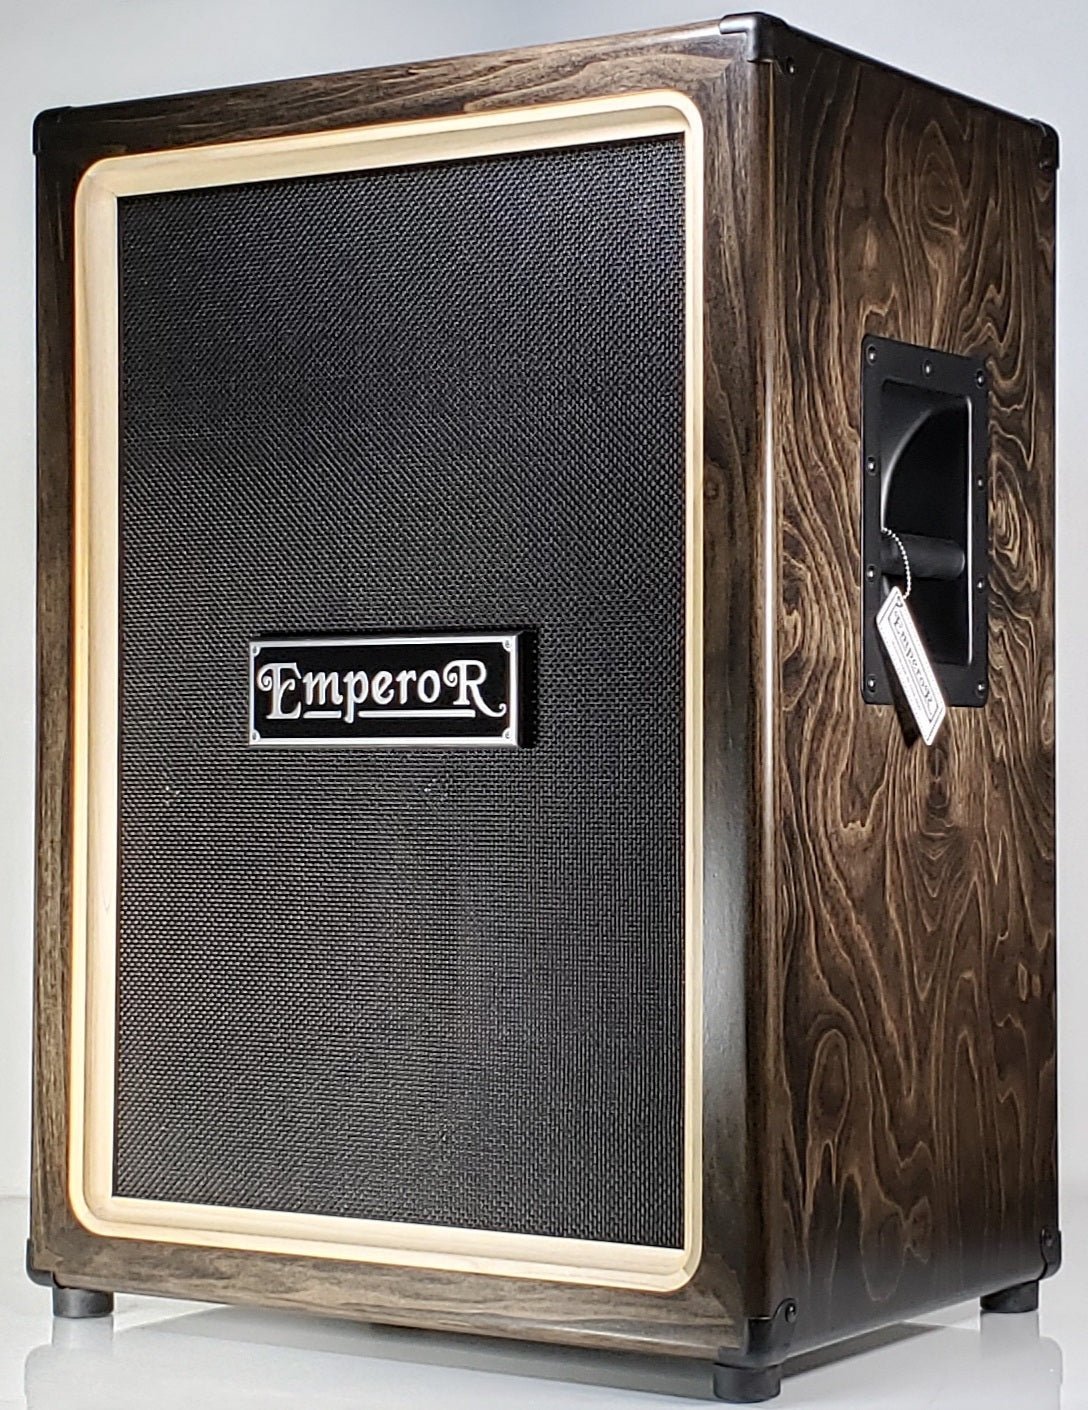 a vertical 2x12 guitar speaker cabinet with a black grille